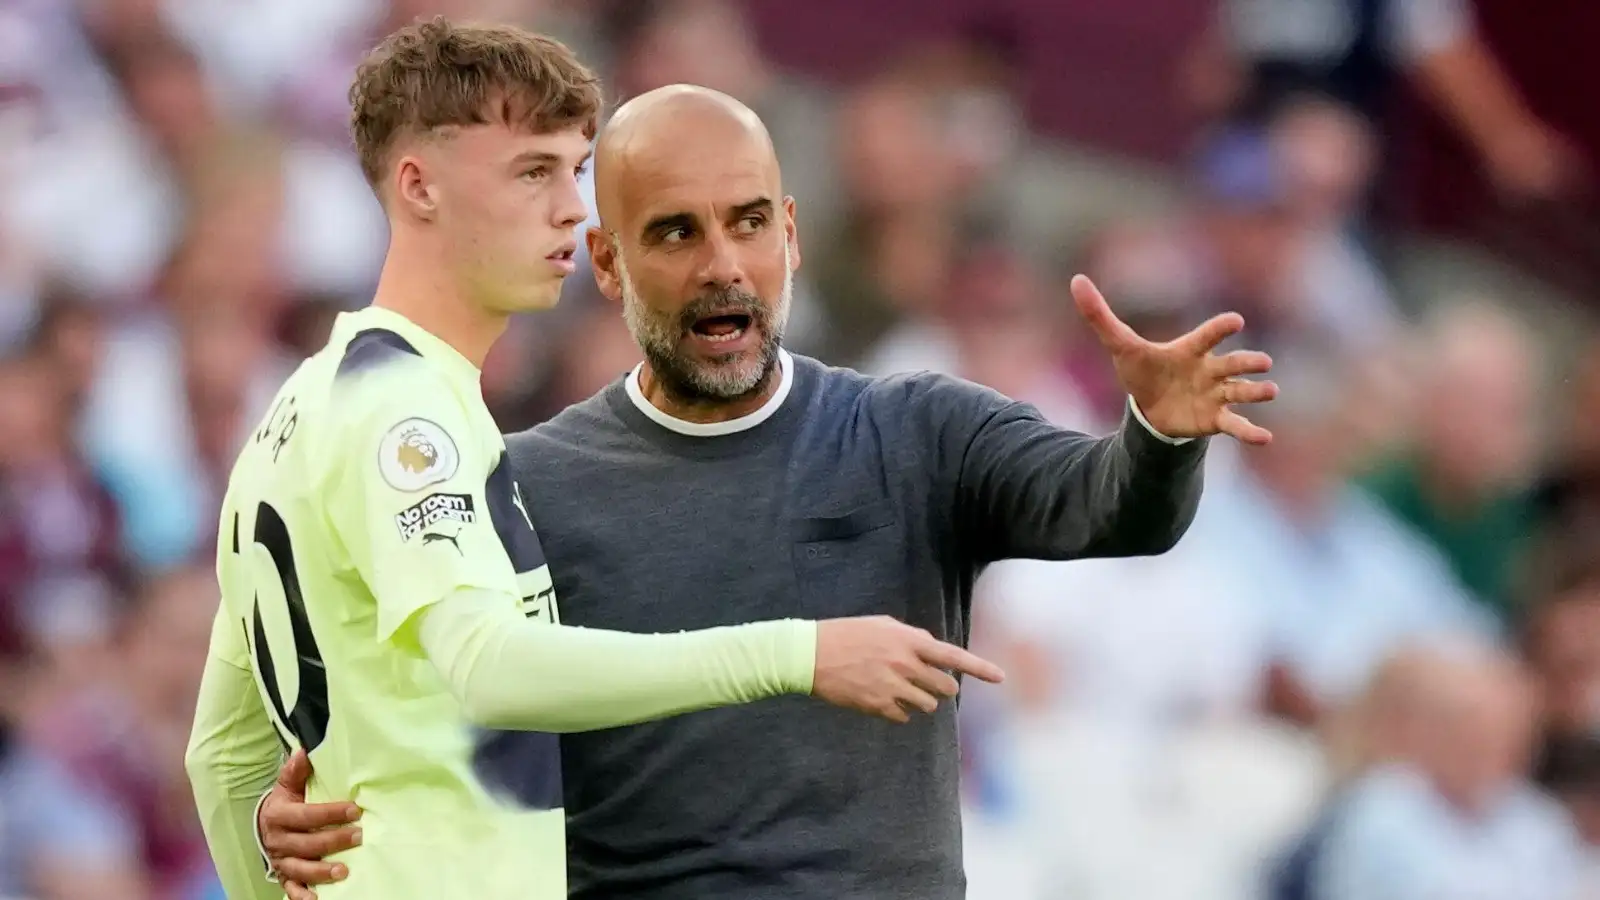 The £440million Man City have made from selling academy graduates under Pep Guardiola